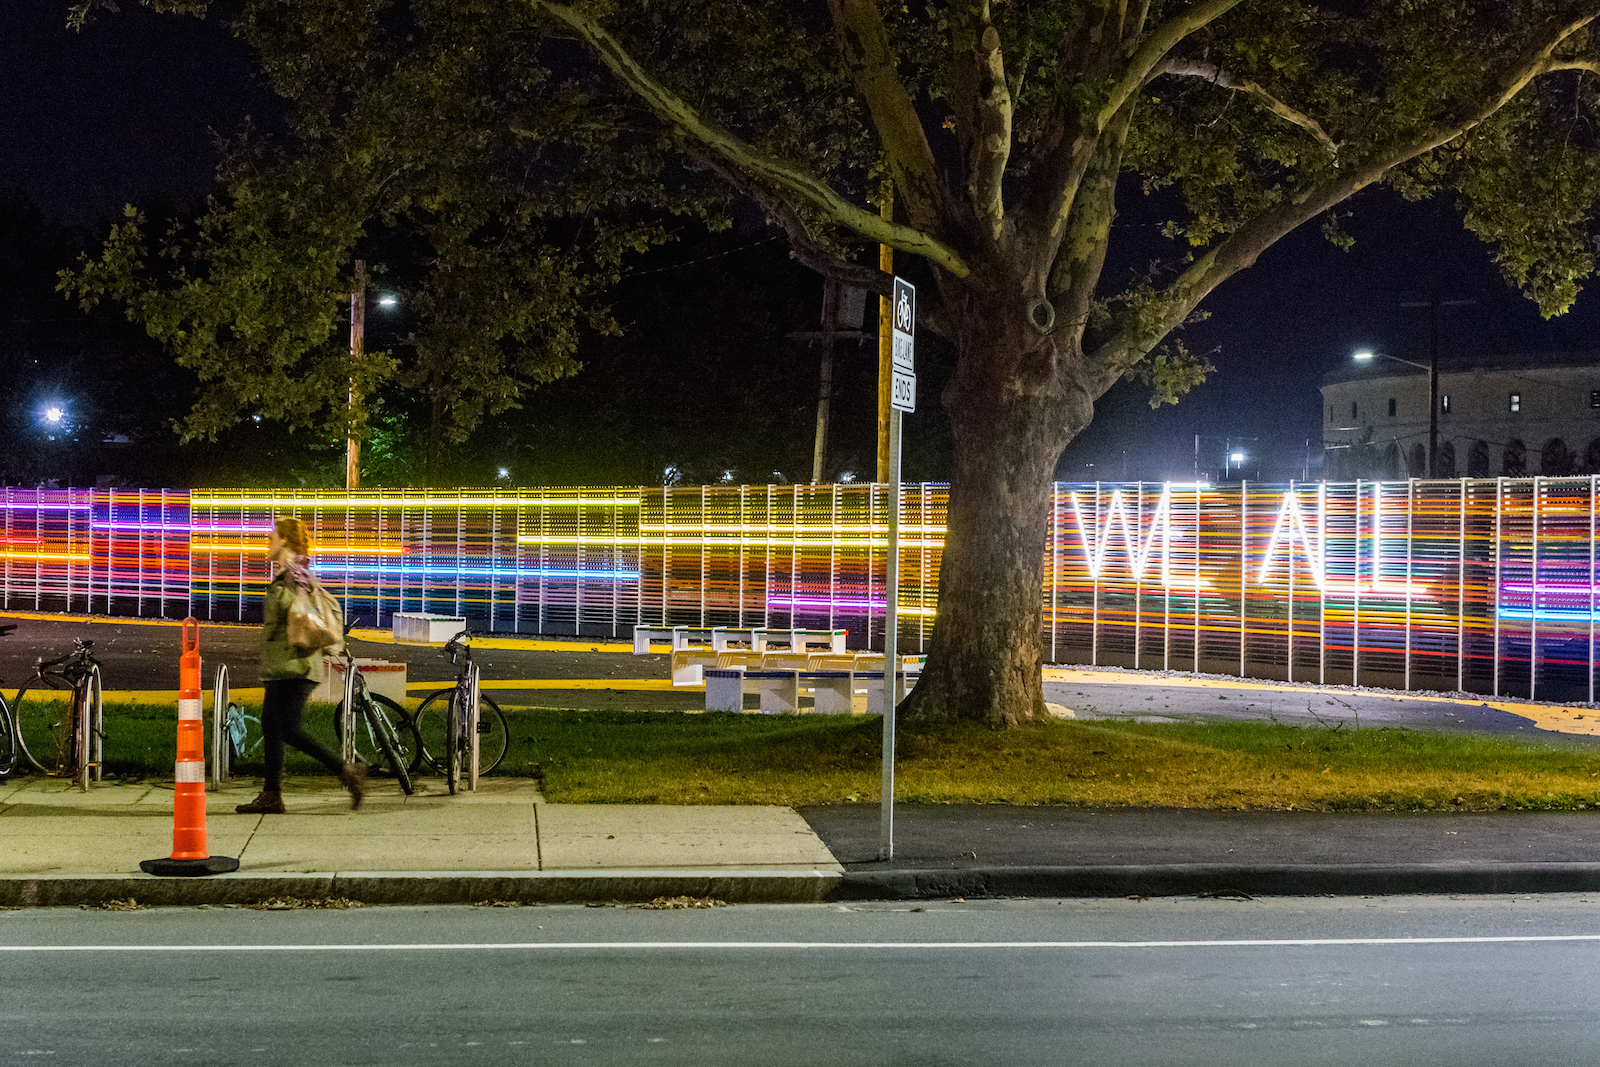 "WE ALL" opens in Allston. Photo by Justin Knight.